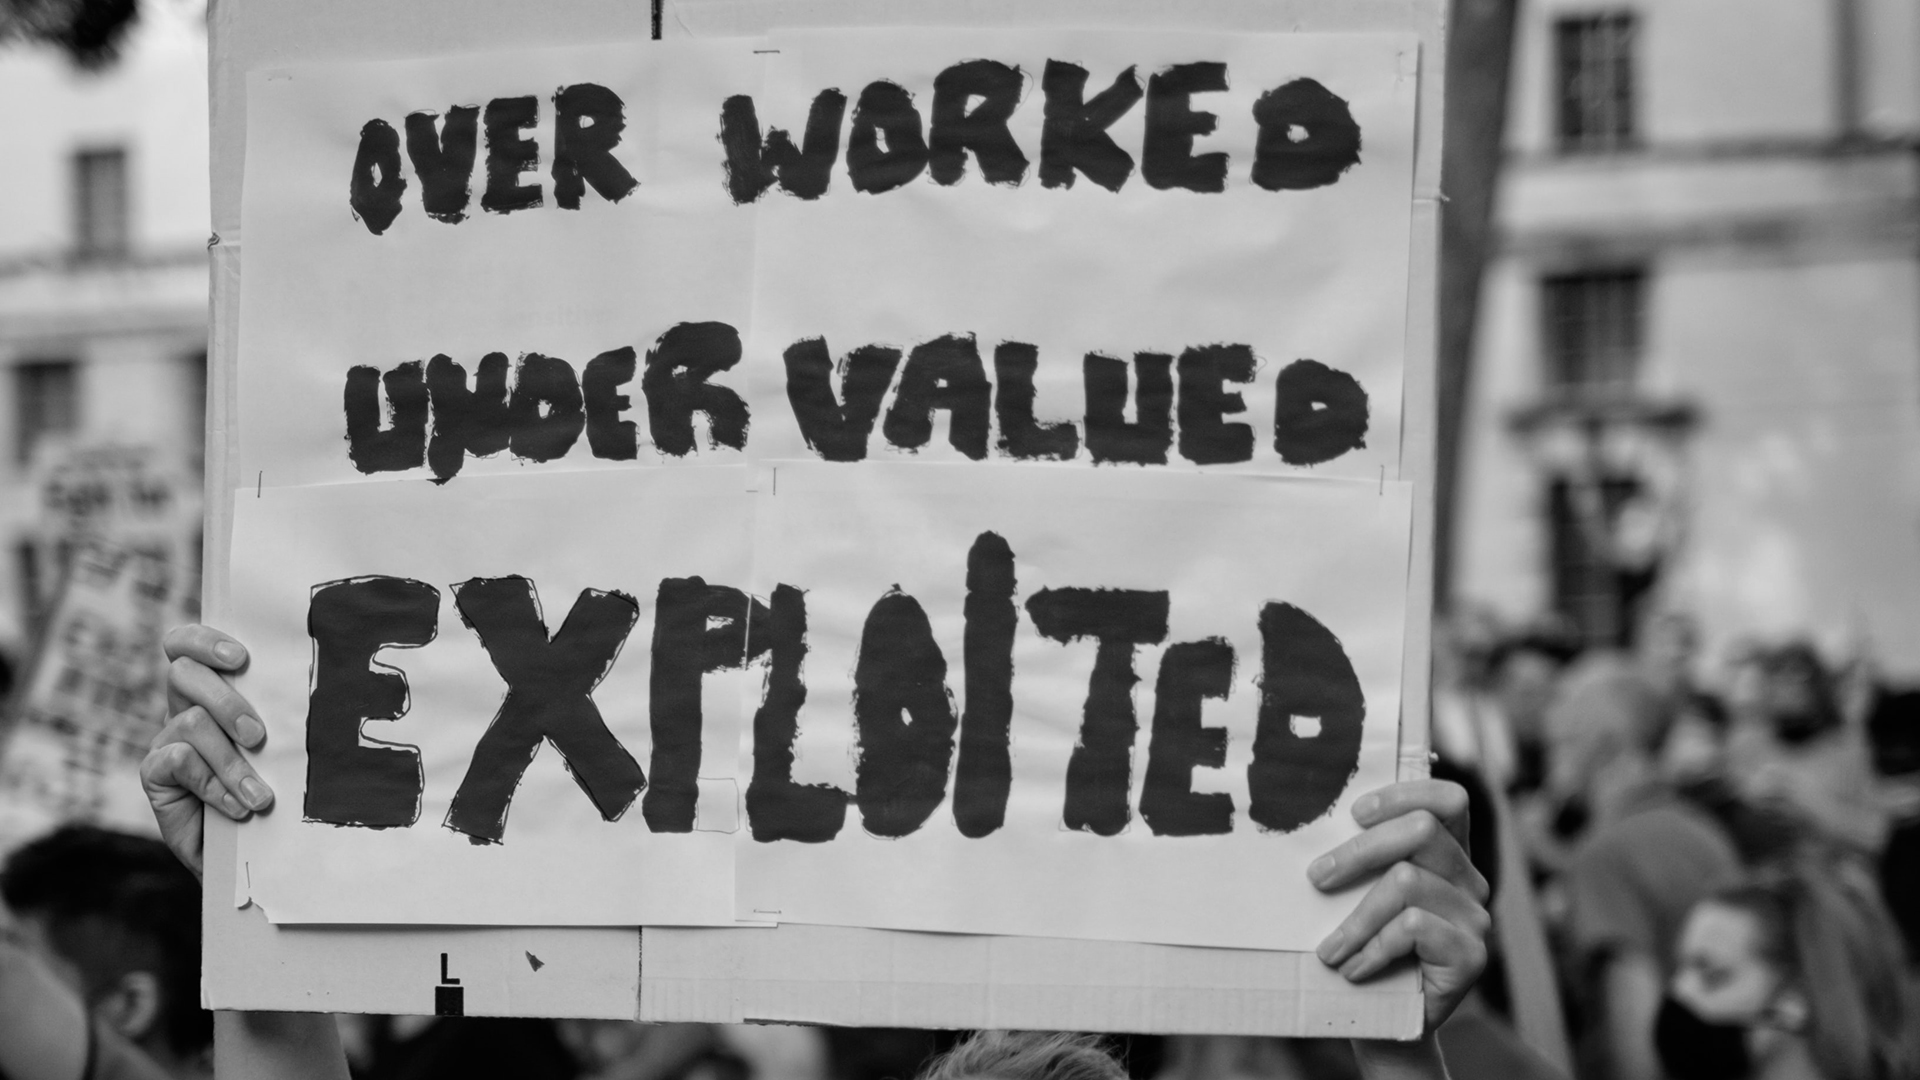 Hands are seen holding up a sign that says "Over Worked, Under Valued, Exploited"